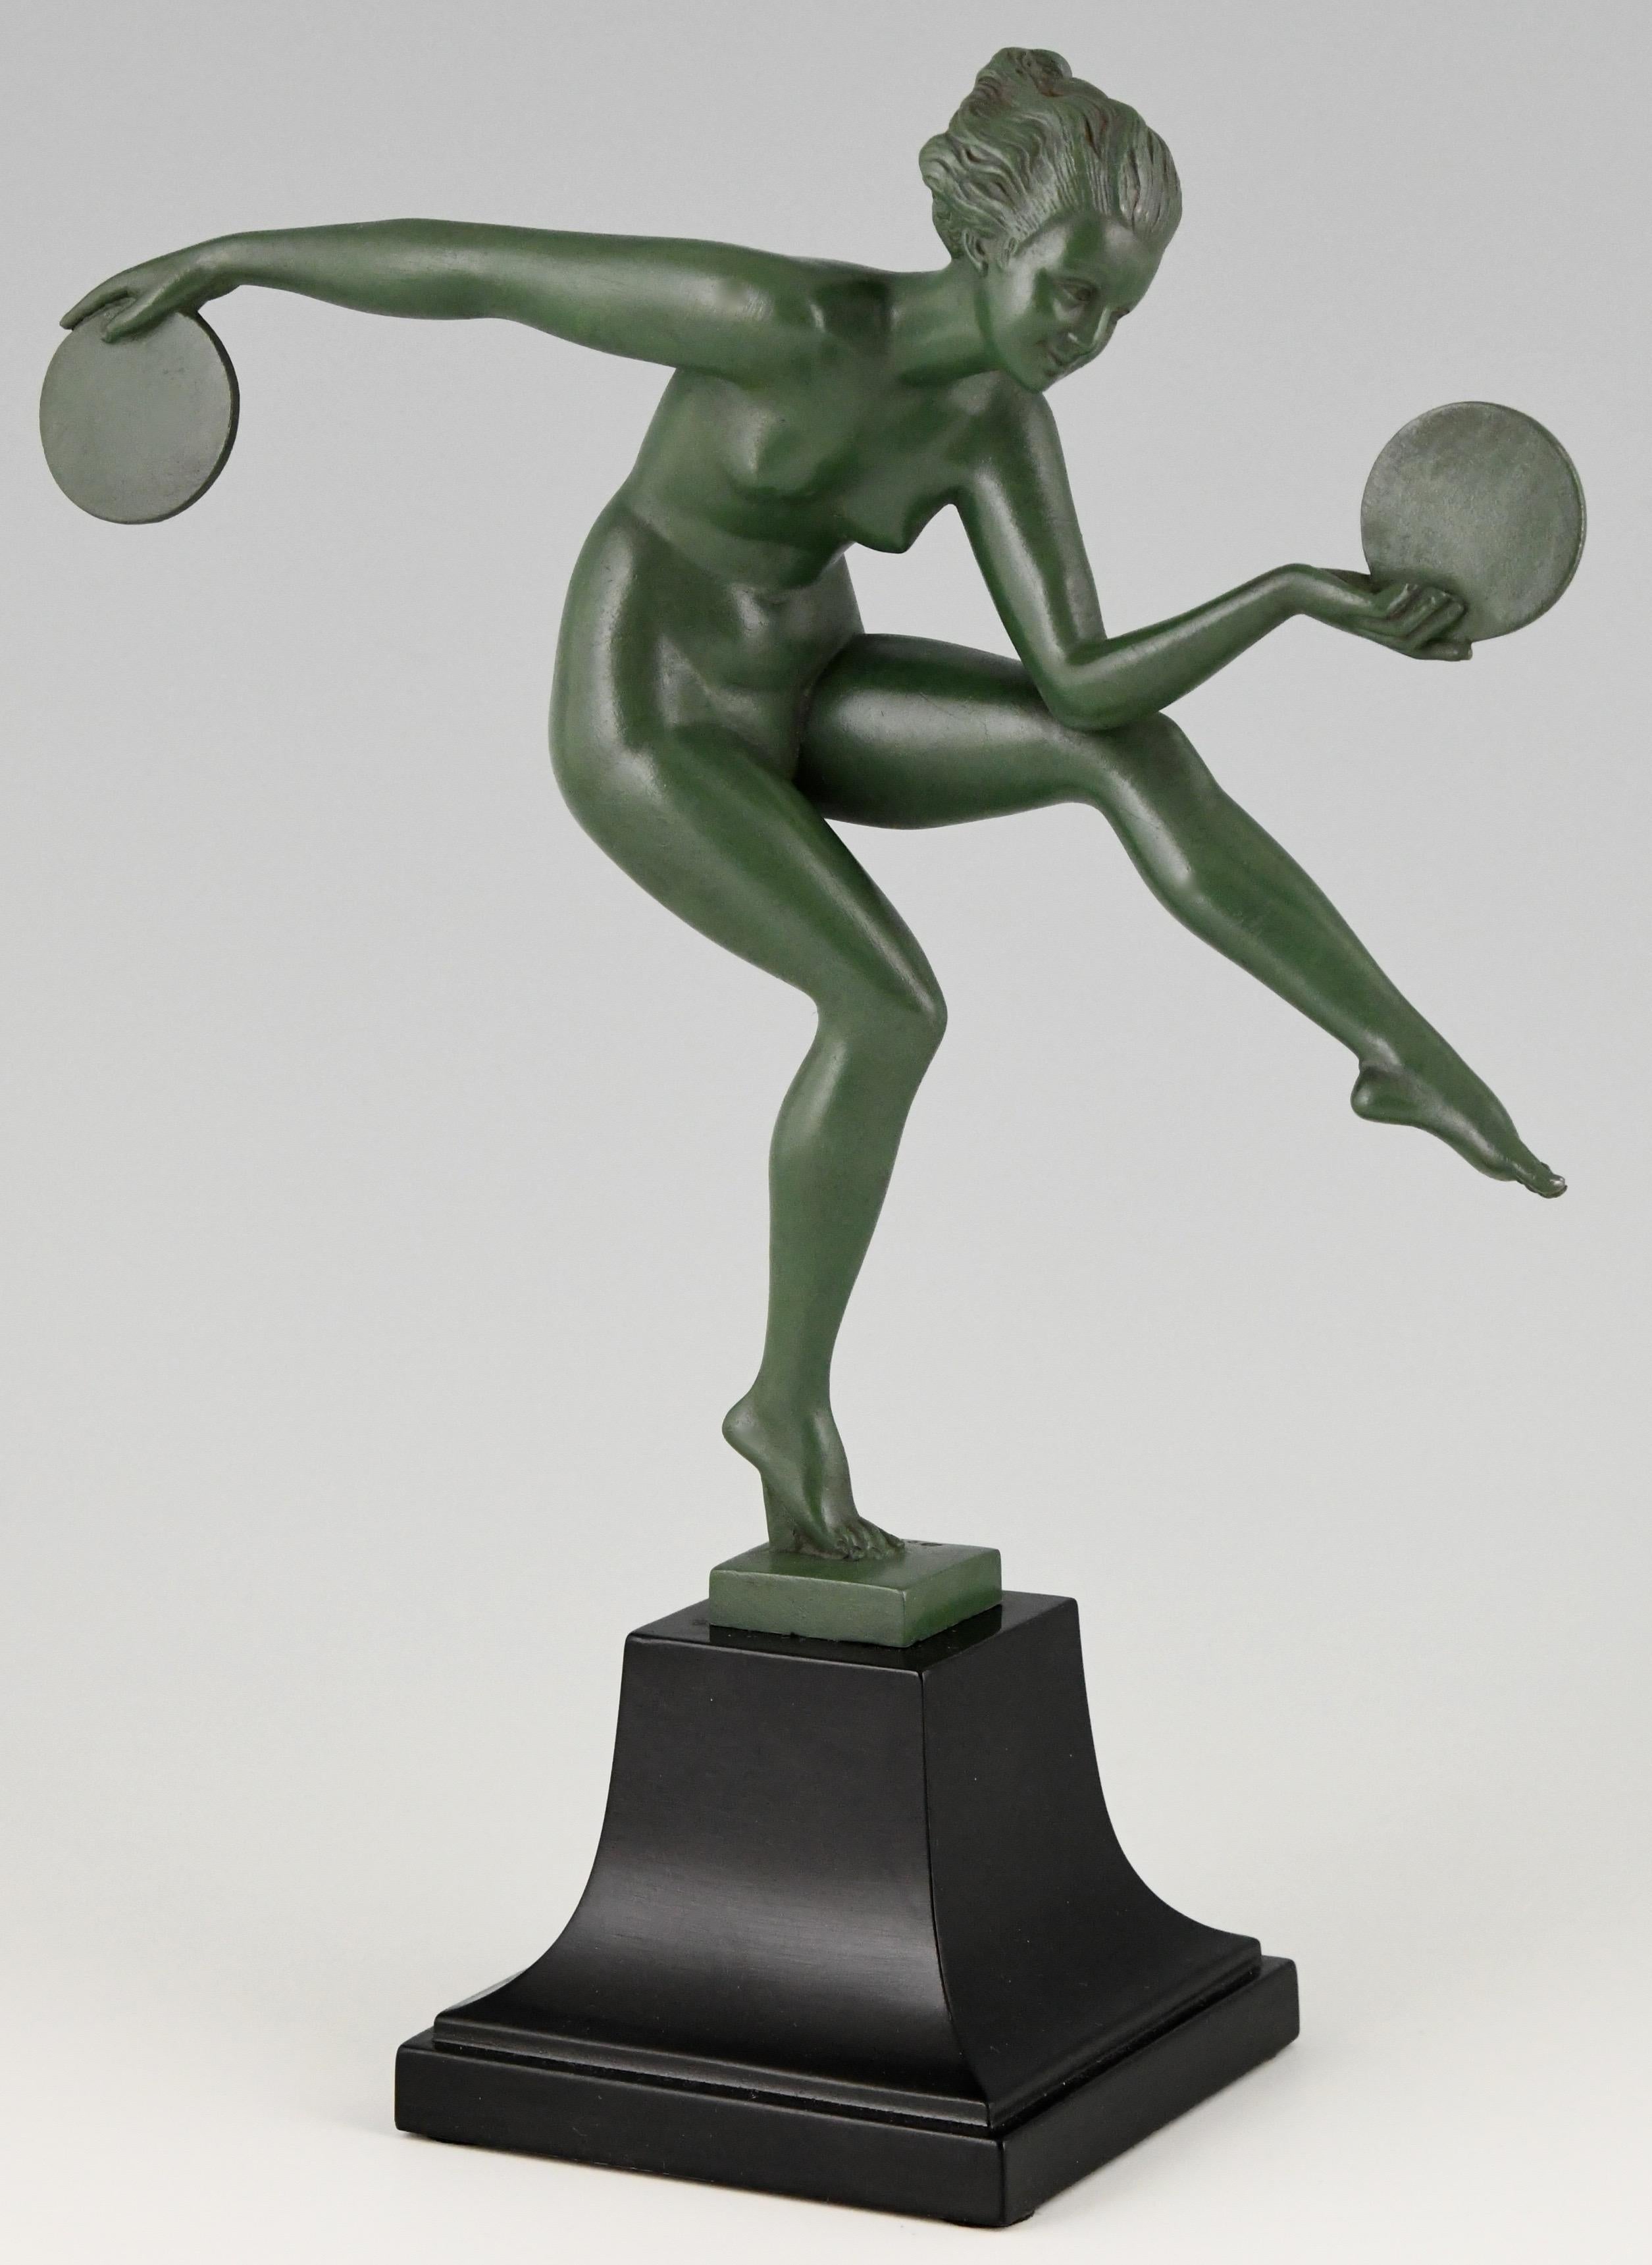 Elegant Art Deco sculpture of nude disc dancer by Derenne.
Pseudonym used by Marcel Bouraine for his art metal sculptures cast by the Max Le Verrier foundry.
This sculpture is in Art metal with a green patina and stands on a black metal base,